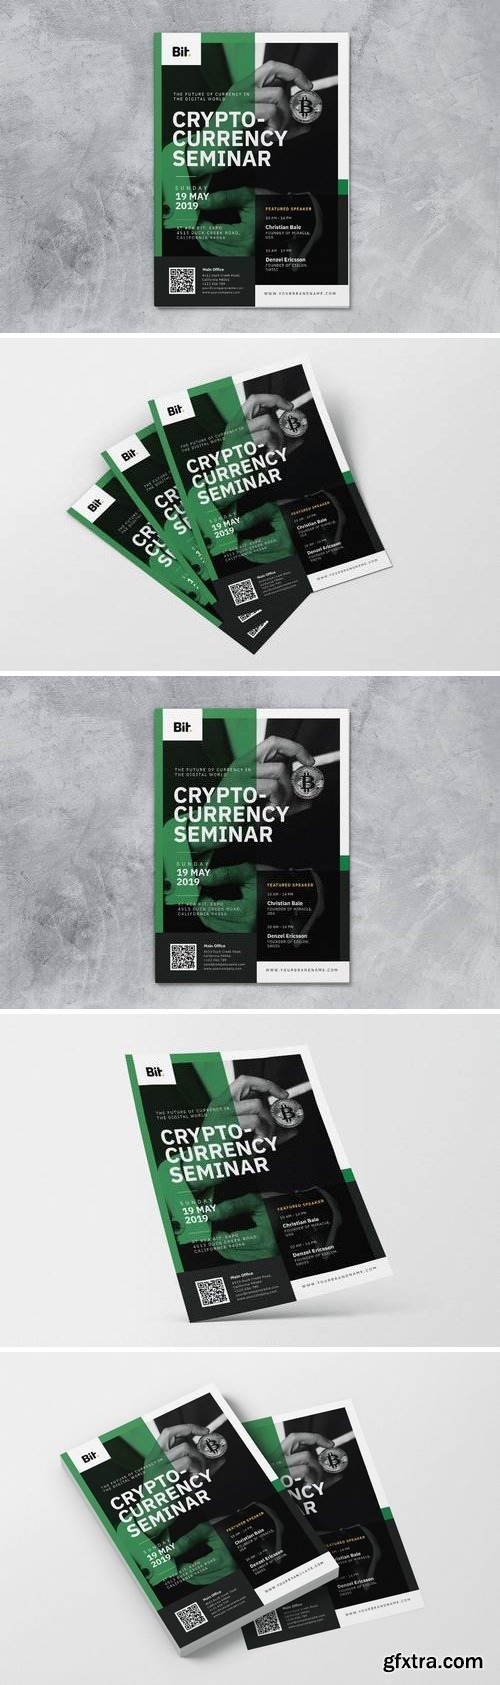 Crypto Currency Seminar AI and PSD Flyer Vol.1